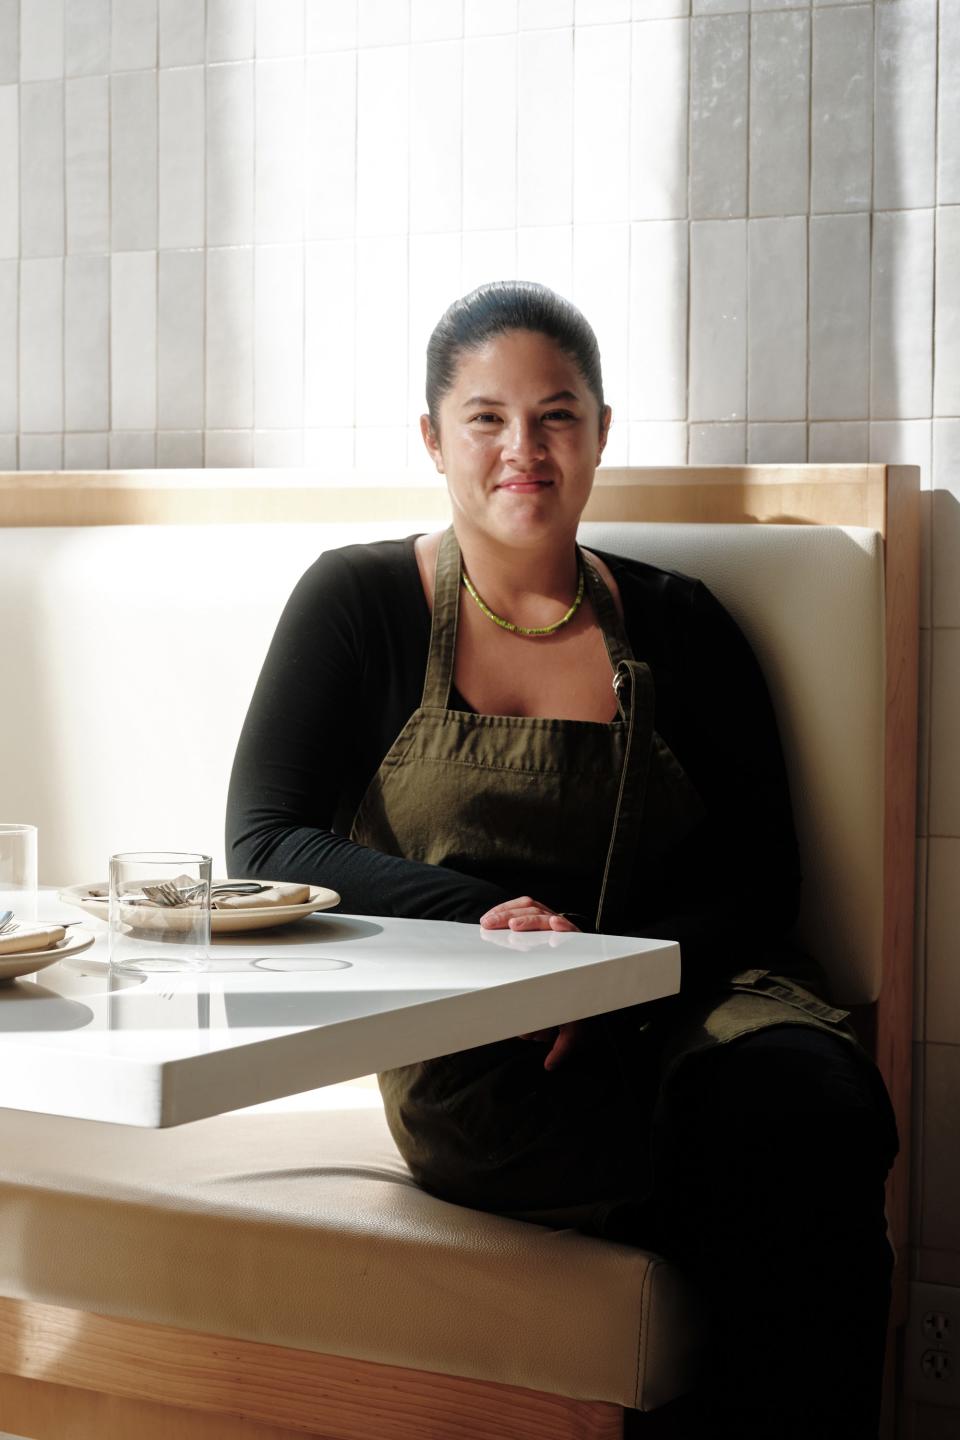 Chef Valerie Chang serves modern Peruvian dishes at Maty's.